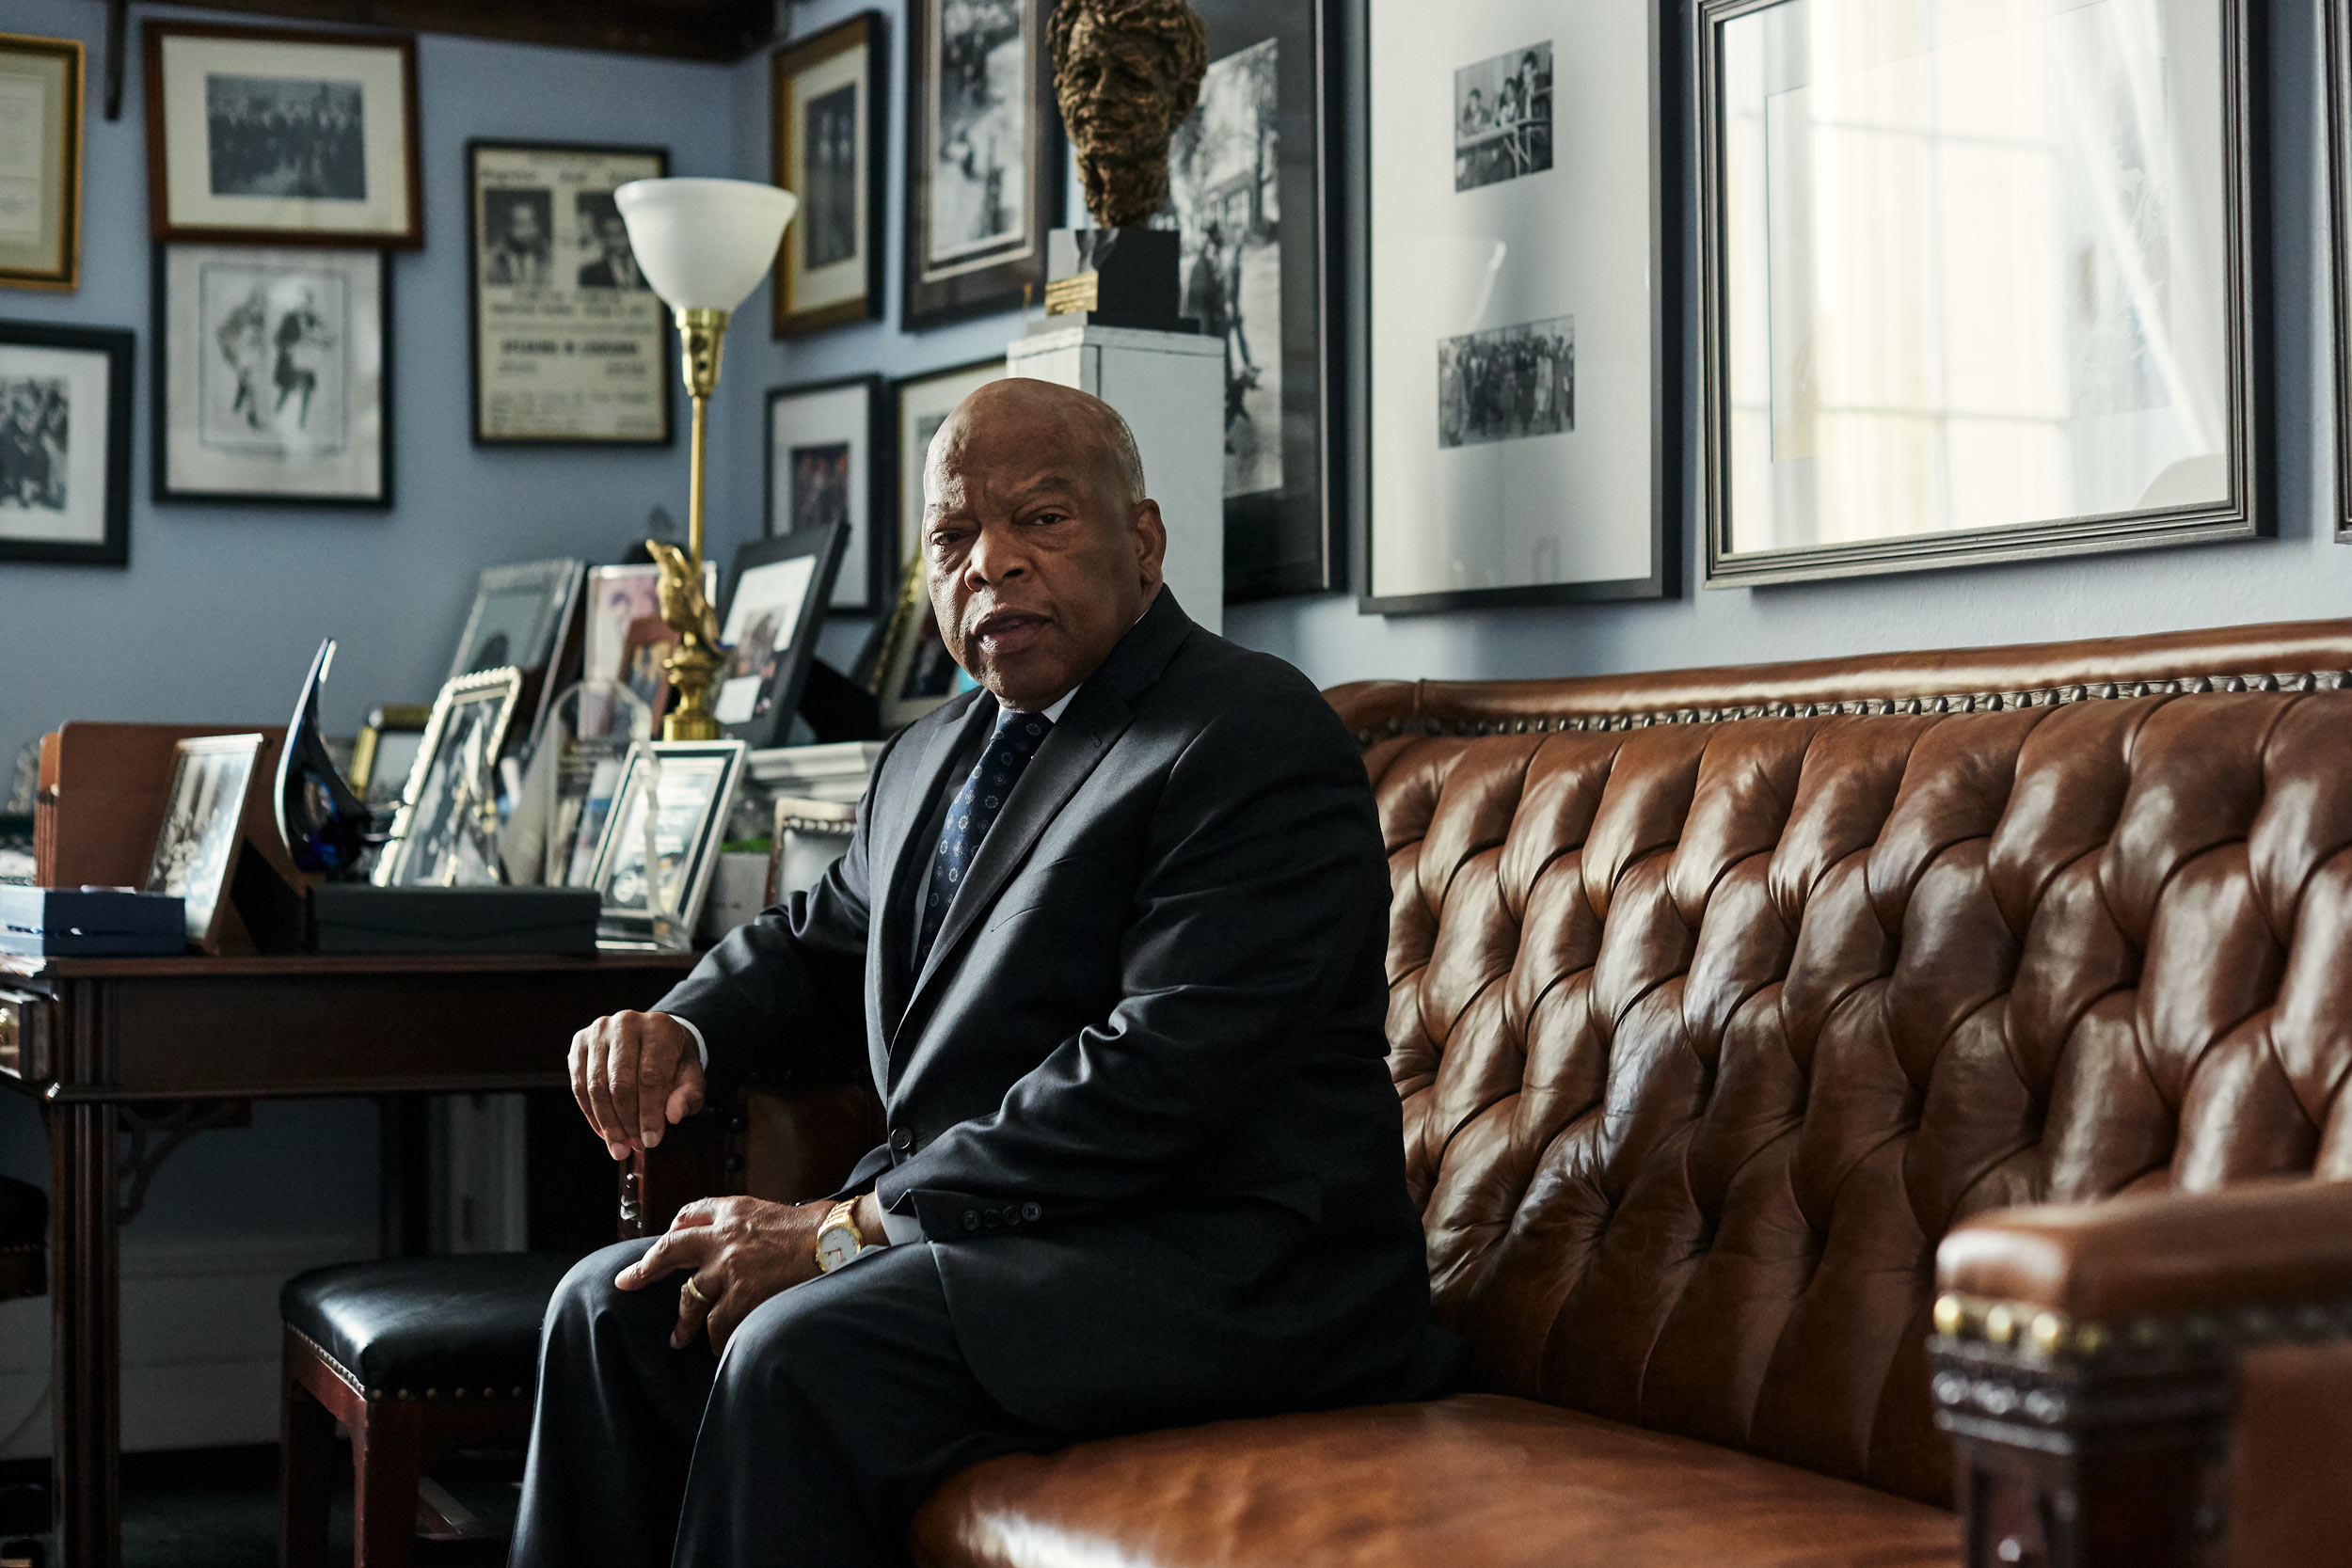 Congressman John Lewis poses for a portrait on a couch in his office at Cannon House Office Building in Washington, DC.